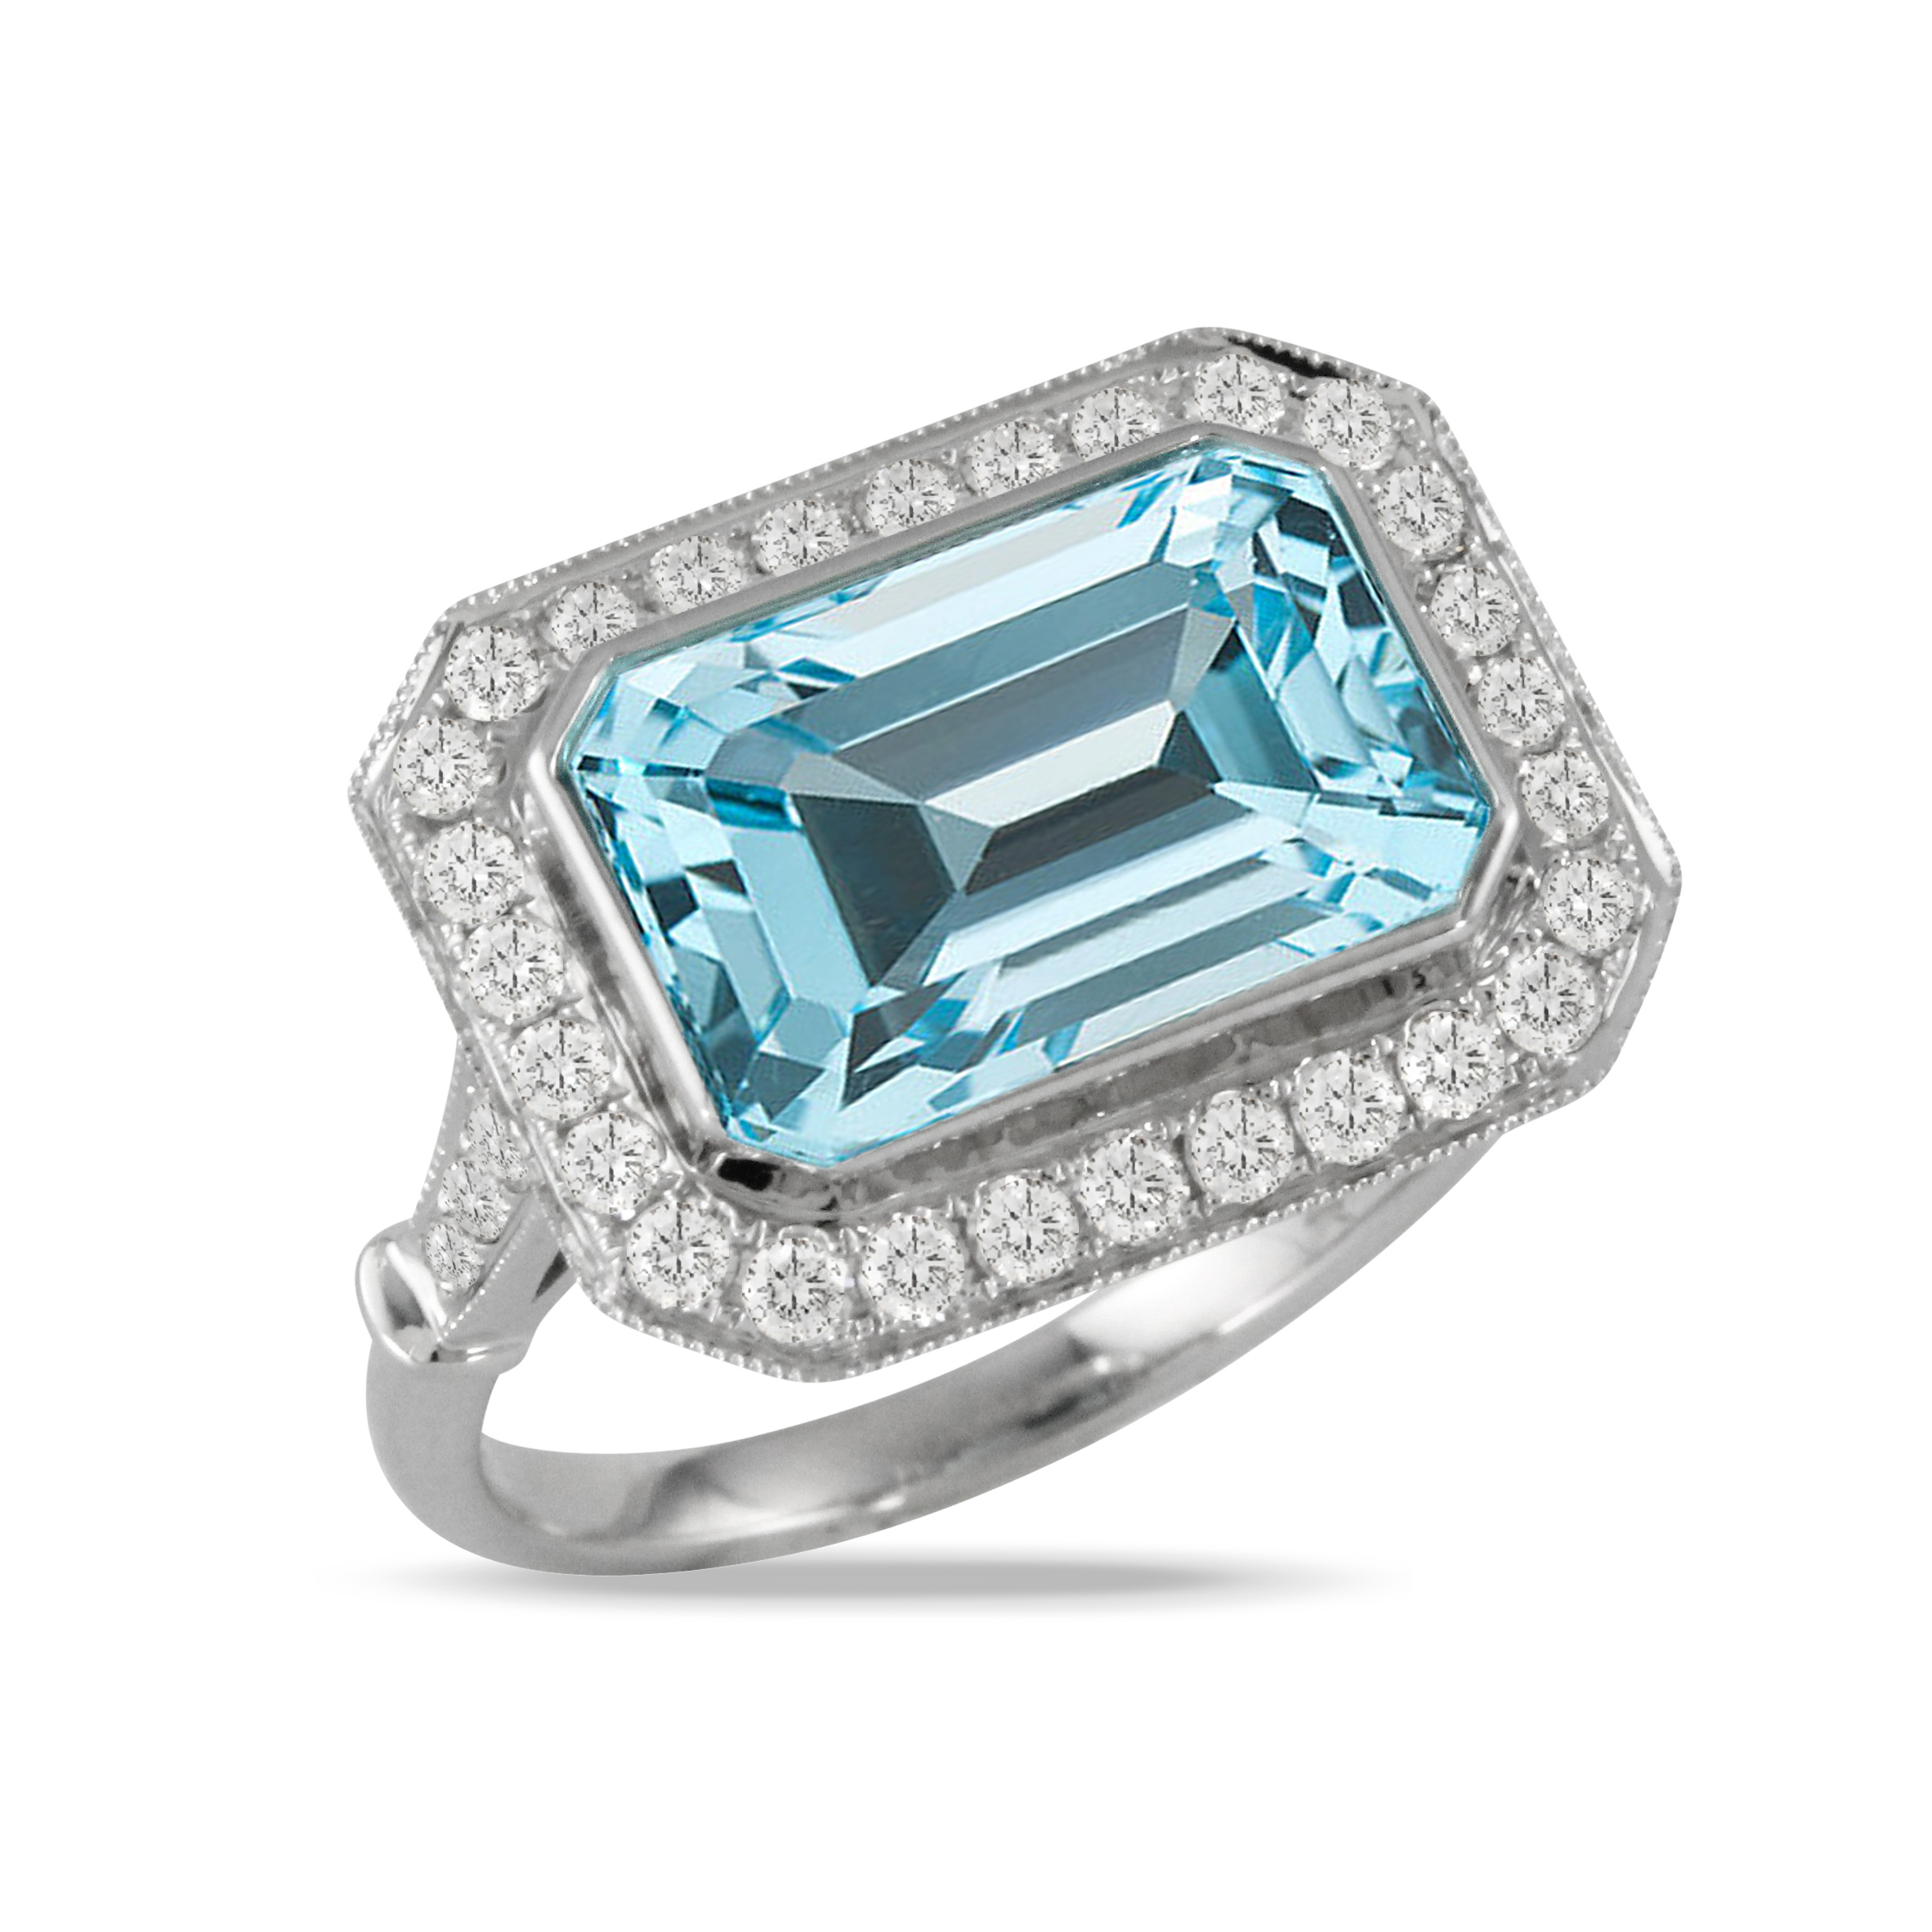 18K White Gold Blue Topaz Fashion Ring Saxons Fine Jewelers Bend, OR